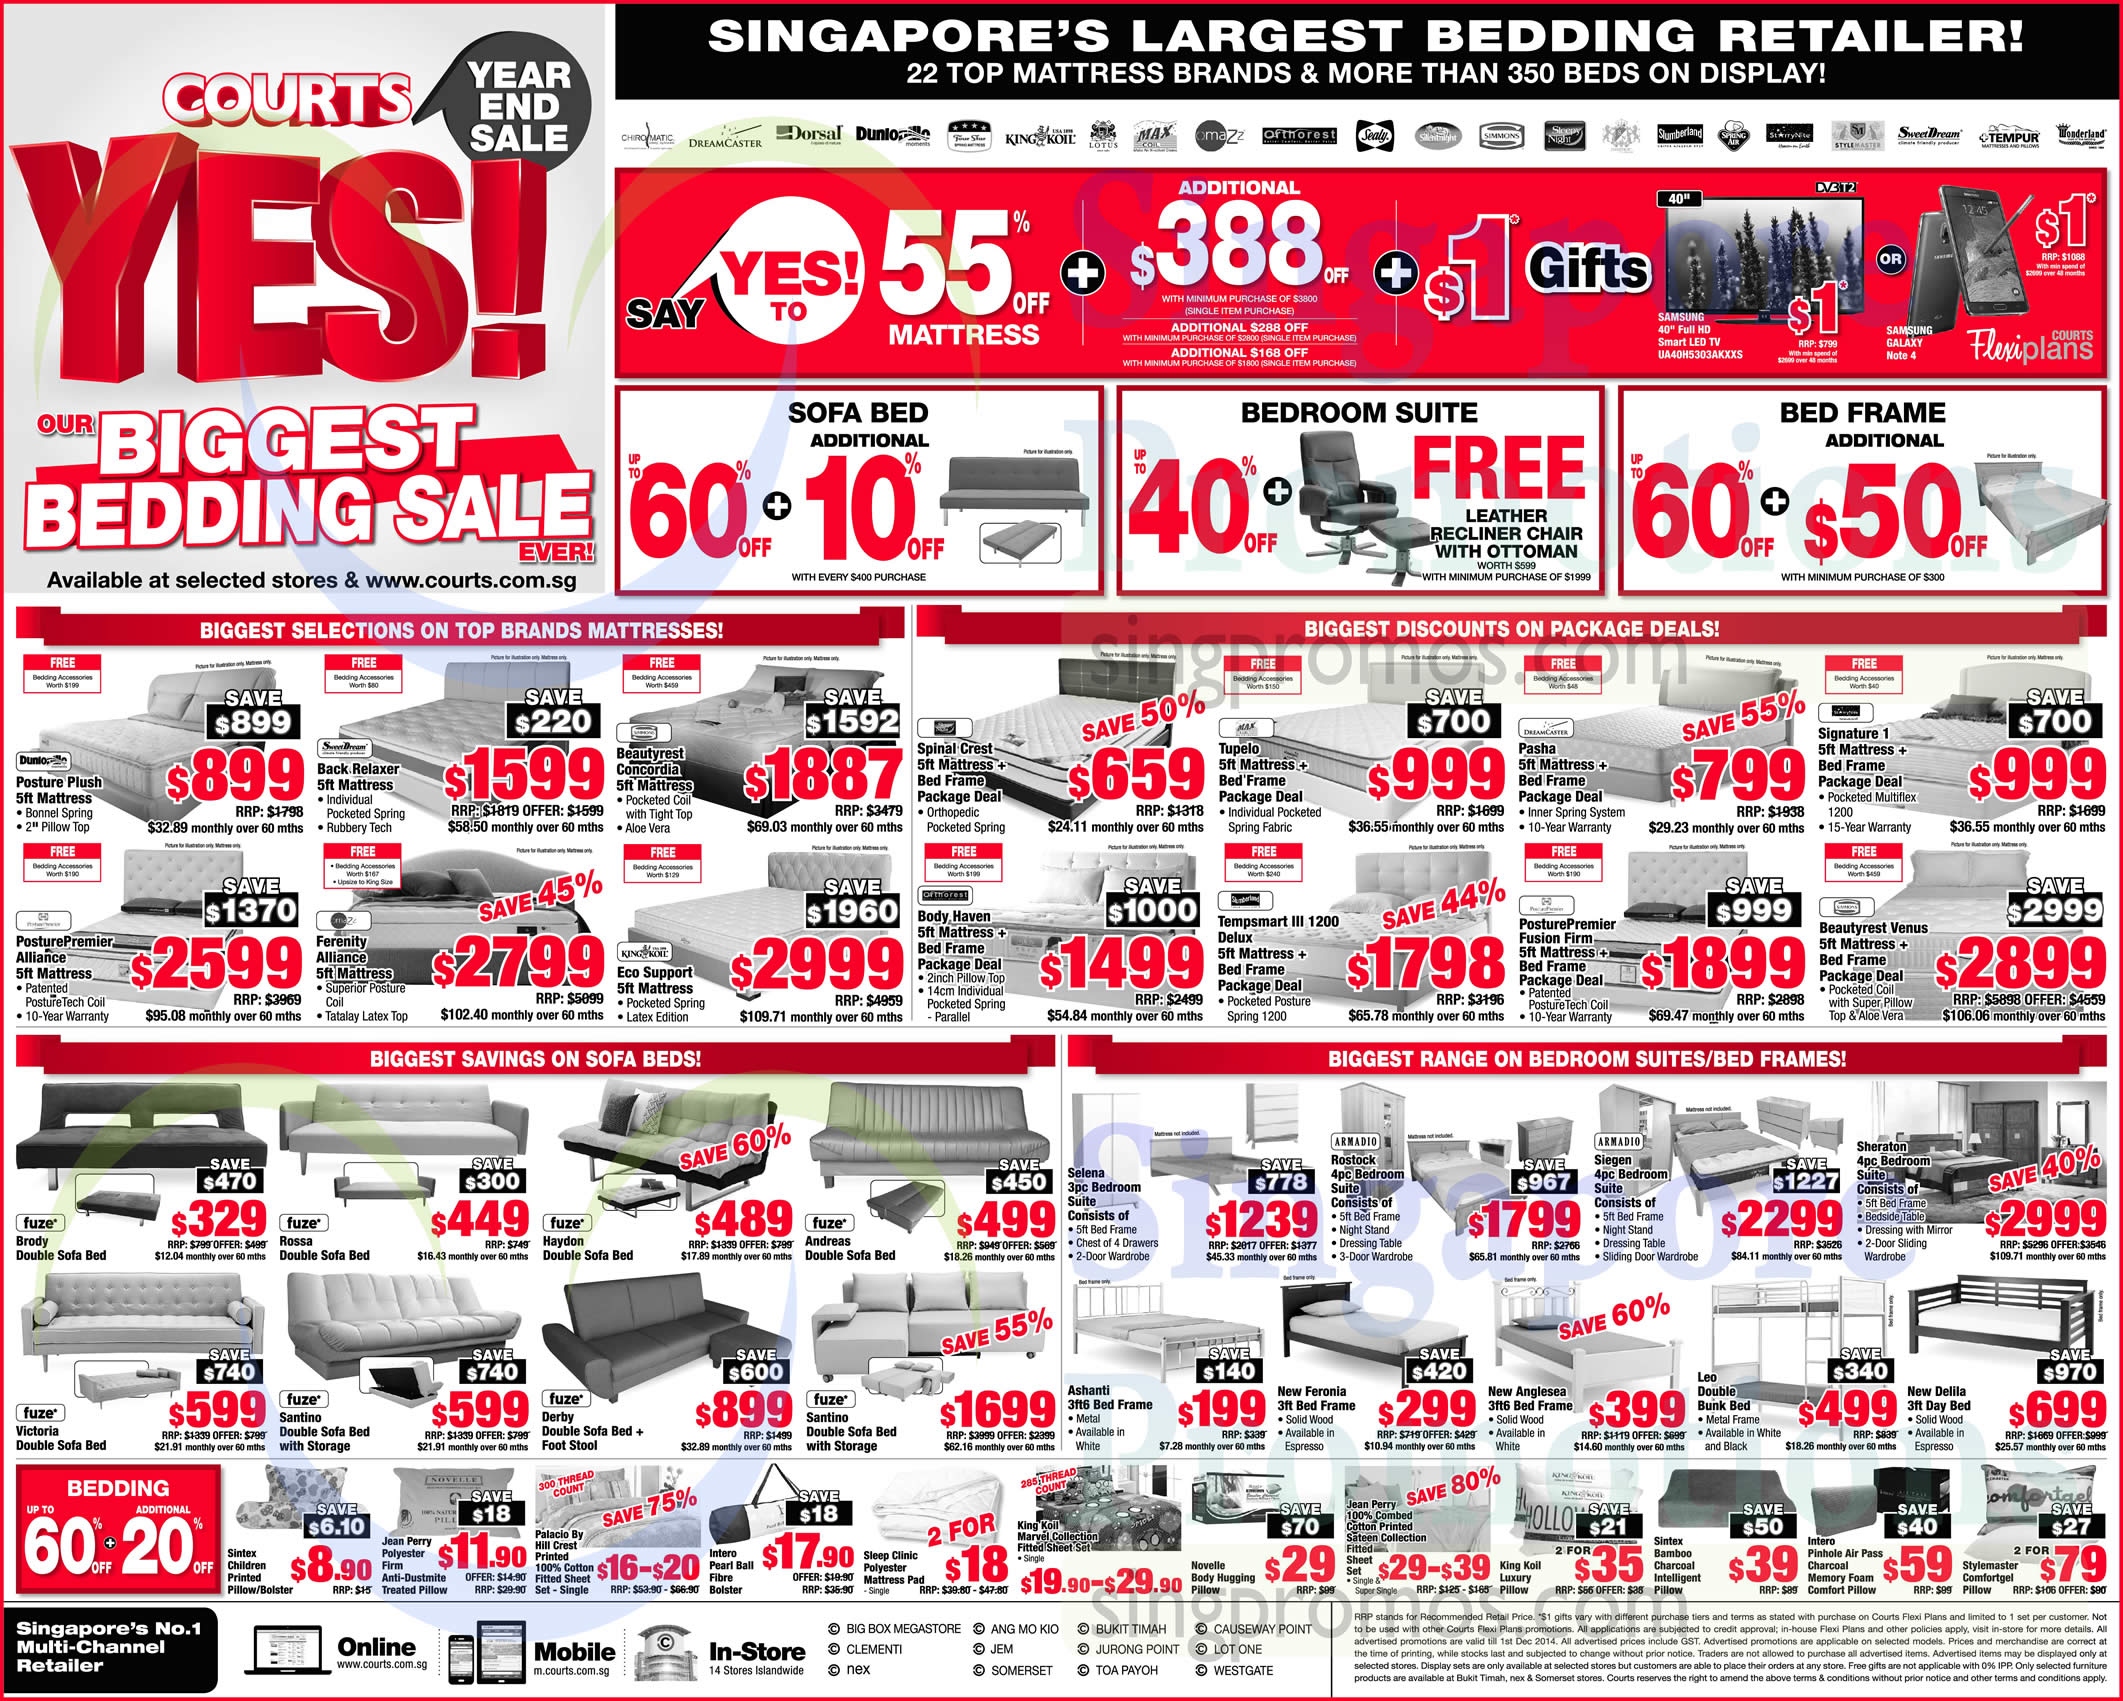 deals on beds and mattresses